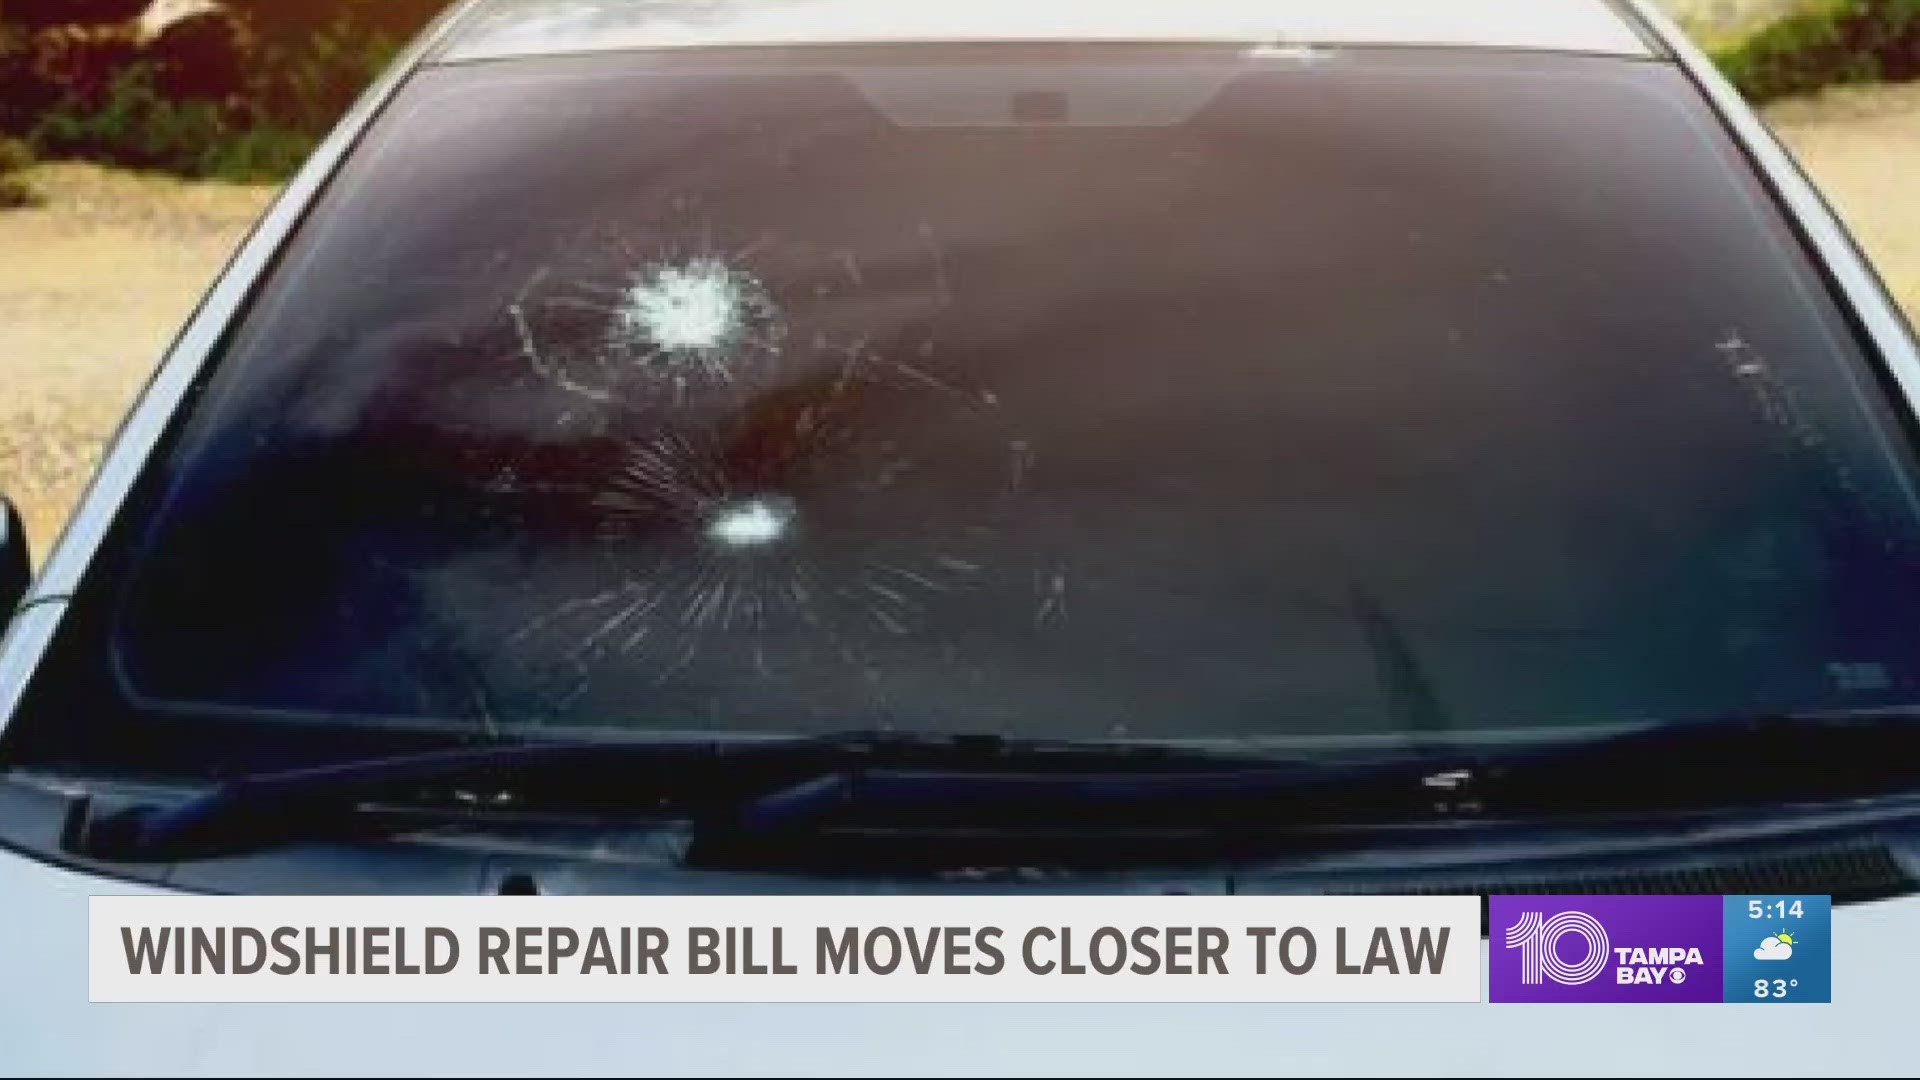 The same bill contains several other measures, like prohibiting auto glass and repair shops from offering perks like cash or gift cards.